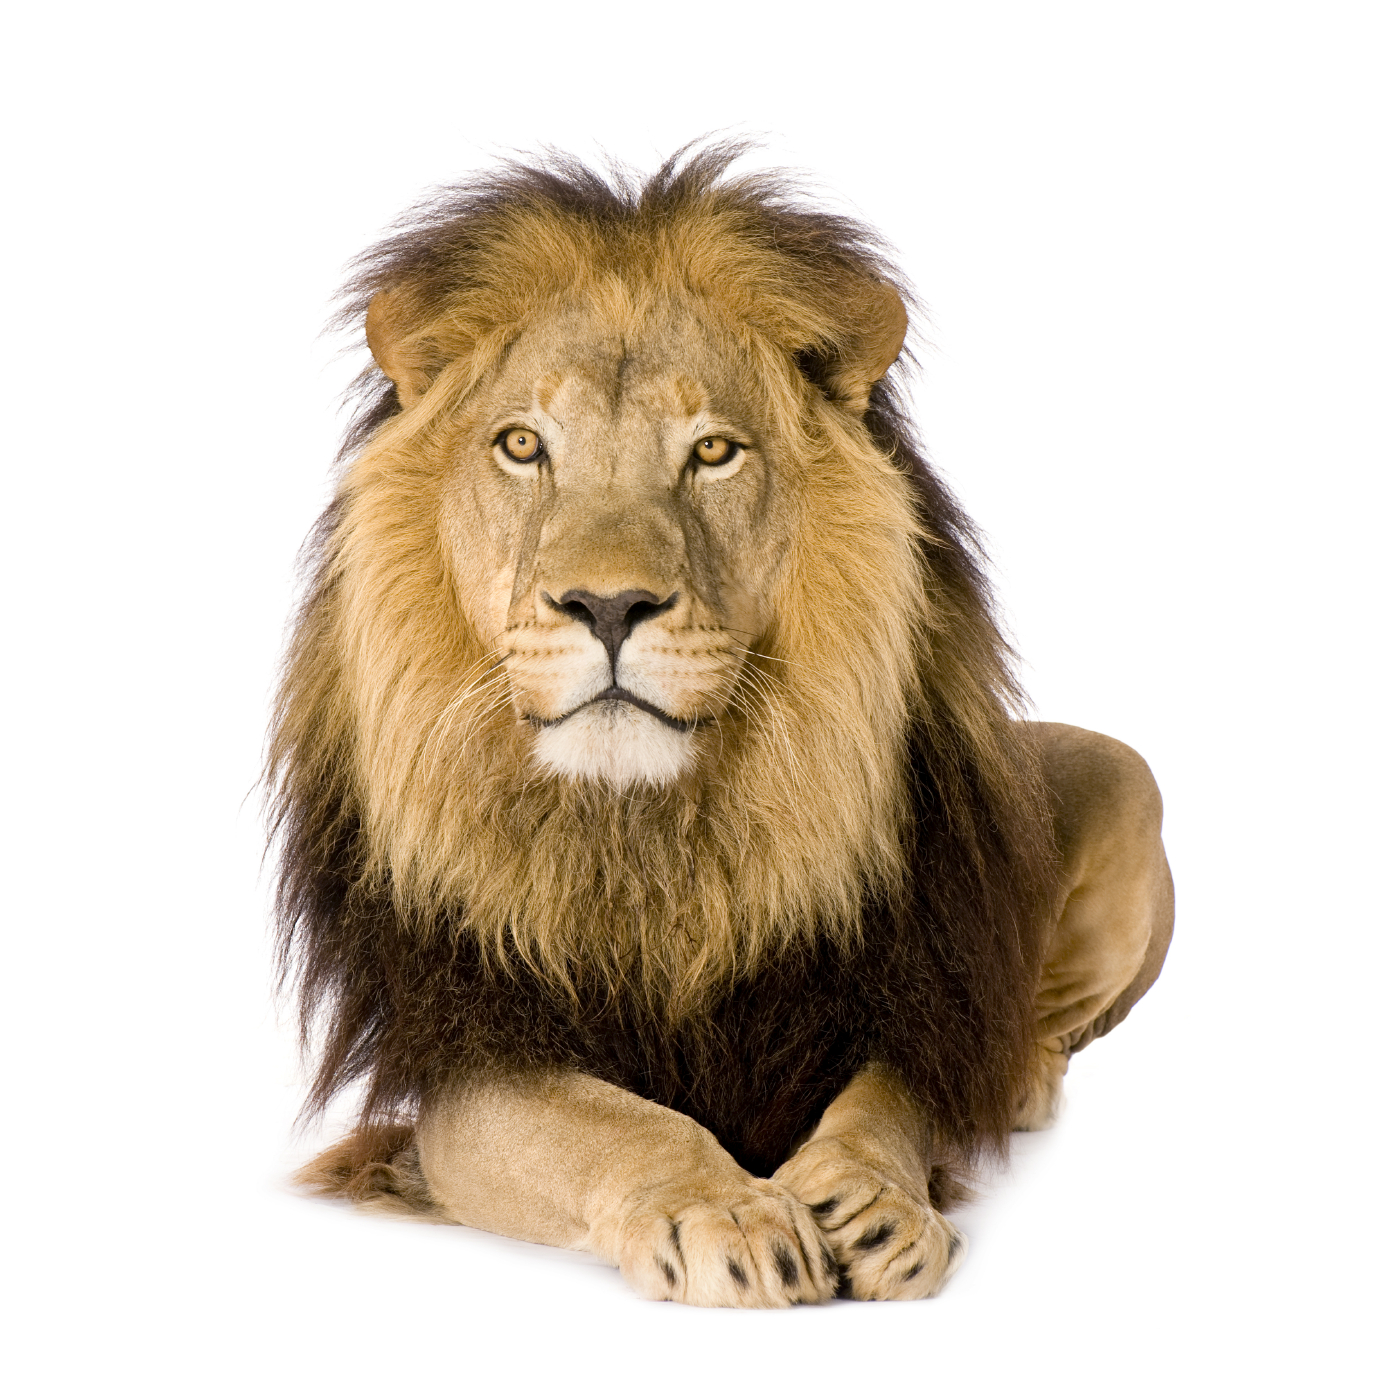 Lion Facts And Pictures For Kids Dowload - Mountain Lion, Transparent background PNG HD thumbnail